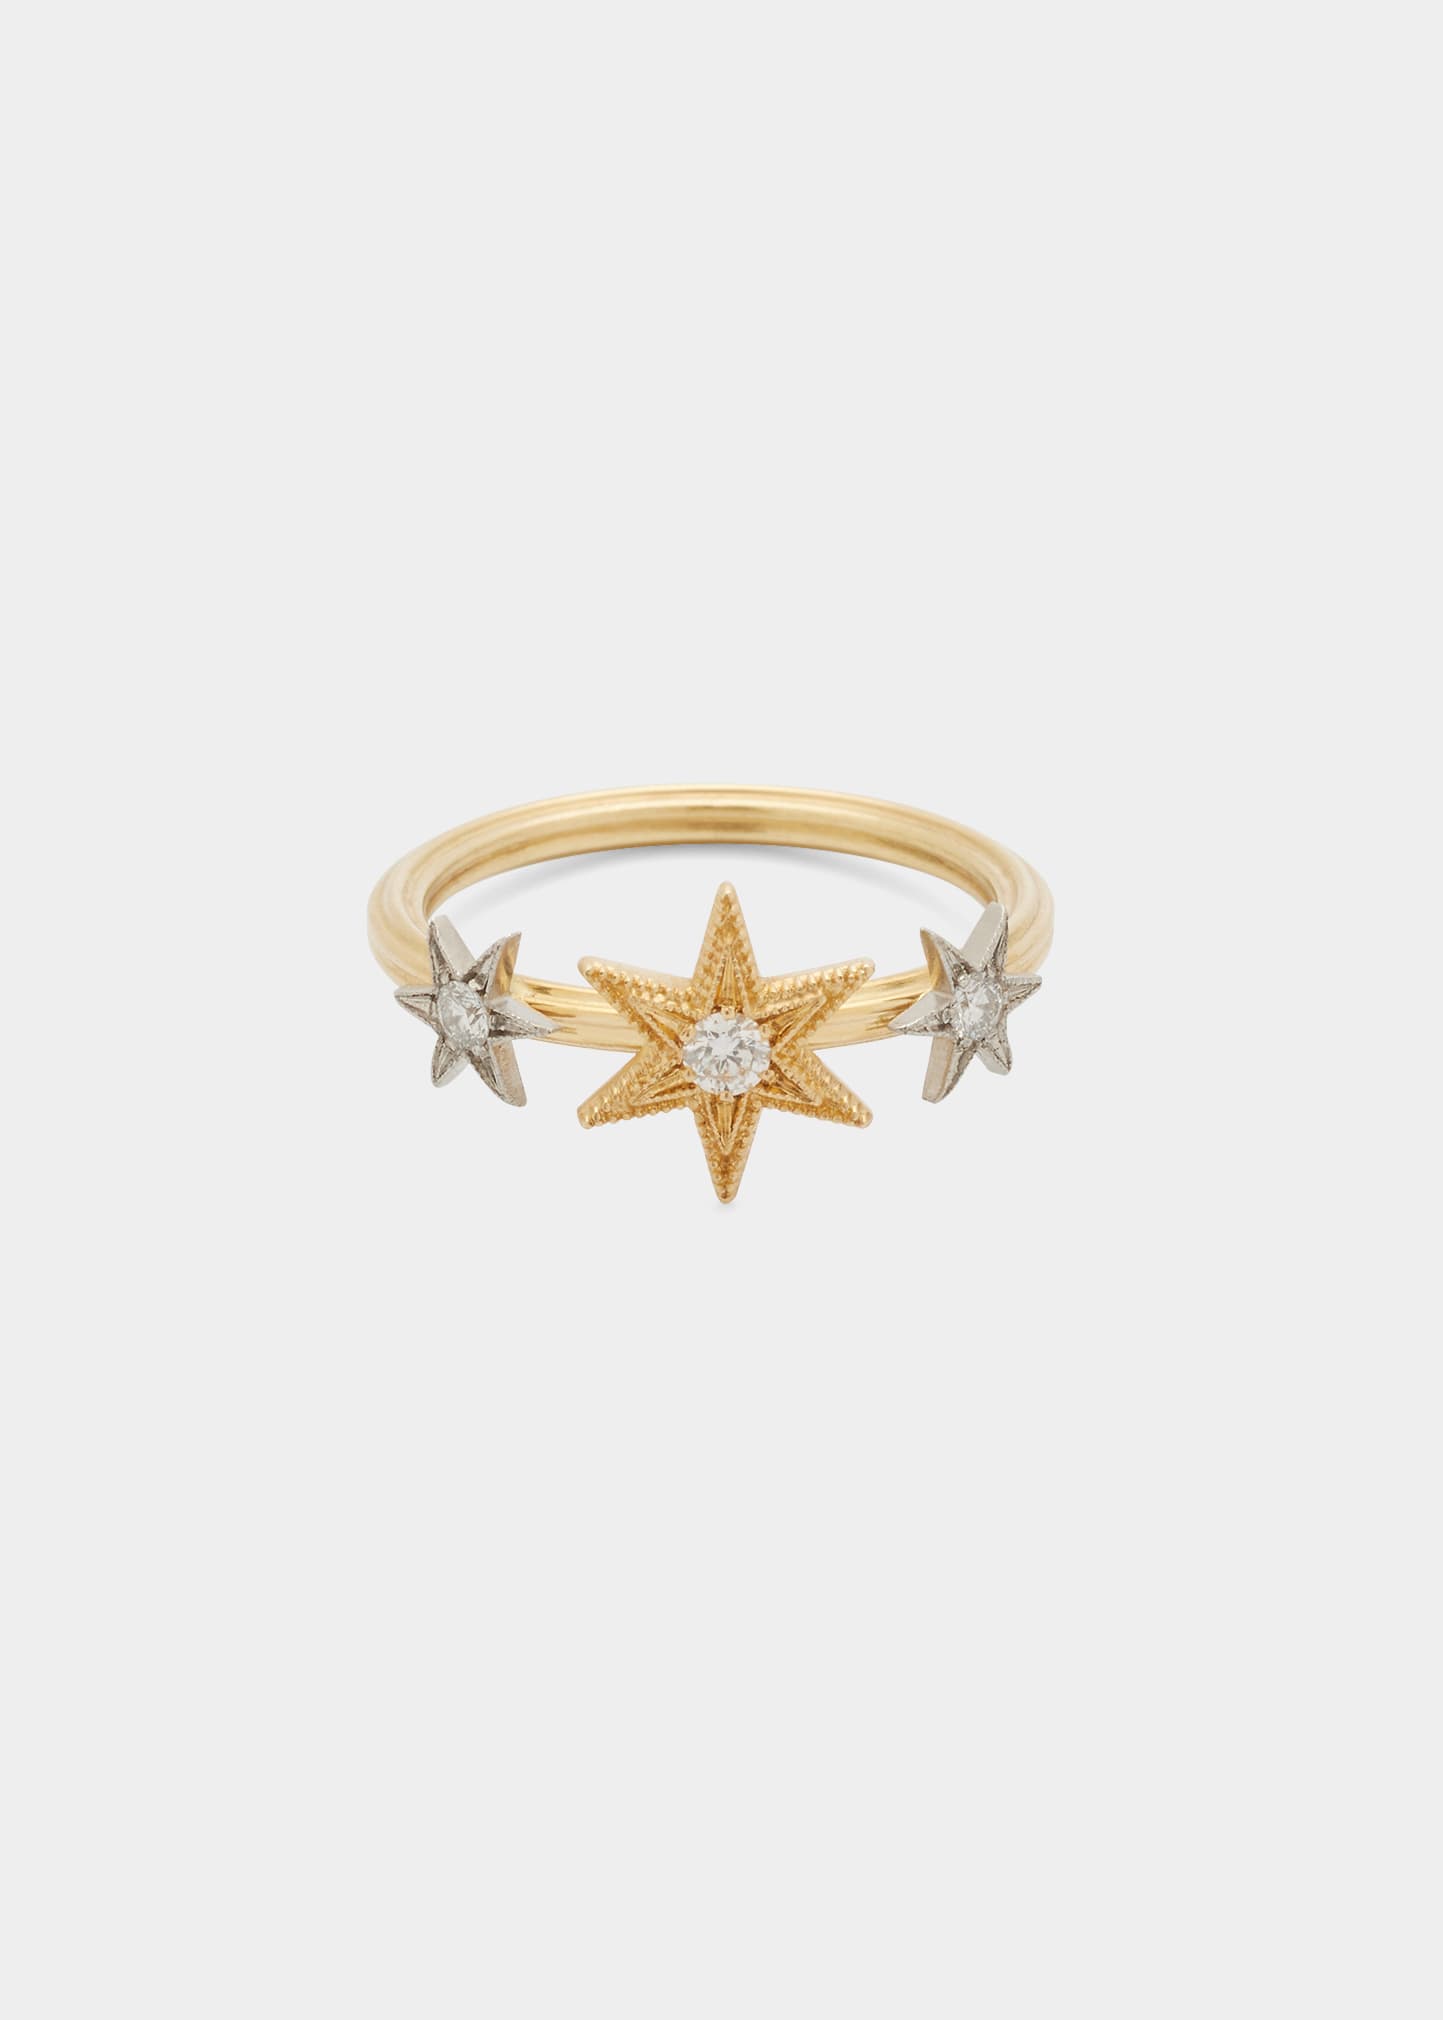 Three Star Ring with Diamonds in 18k Gold and Platinum